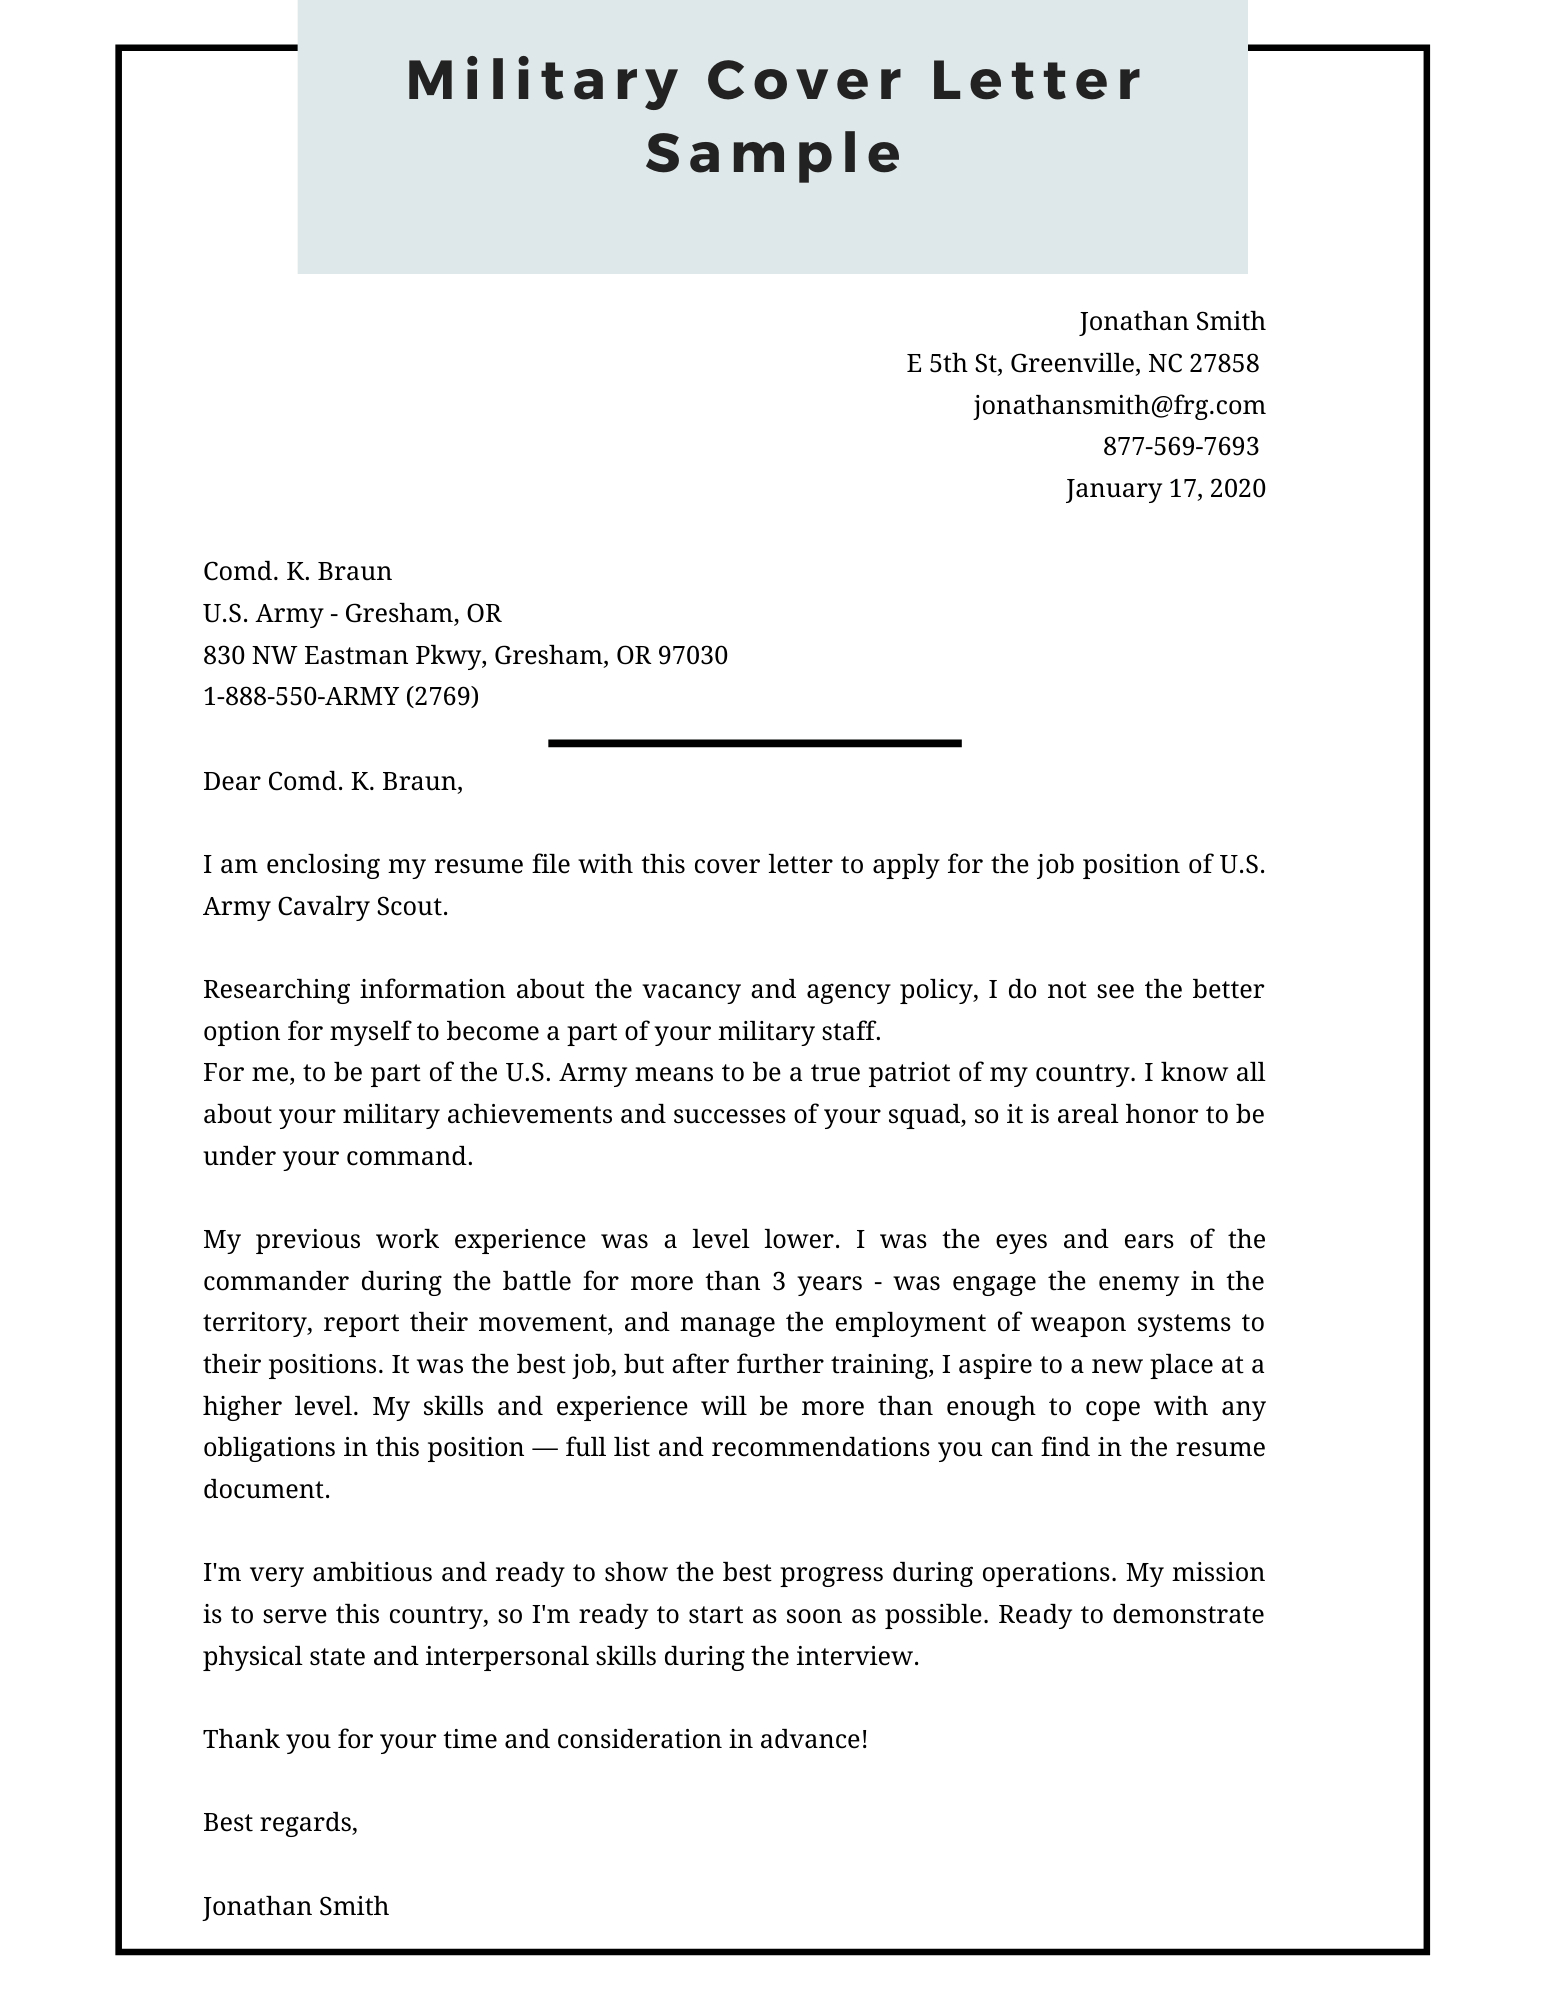 Military Cover Letter Sample Pdf Word Cover Letter inside dimensions 1545 X 2000